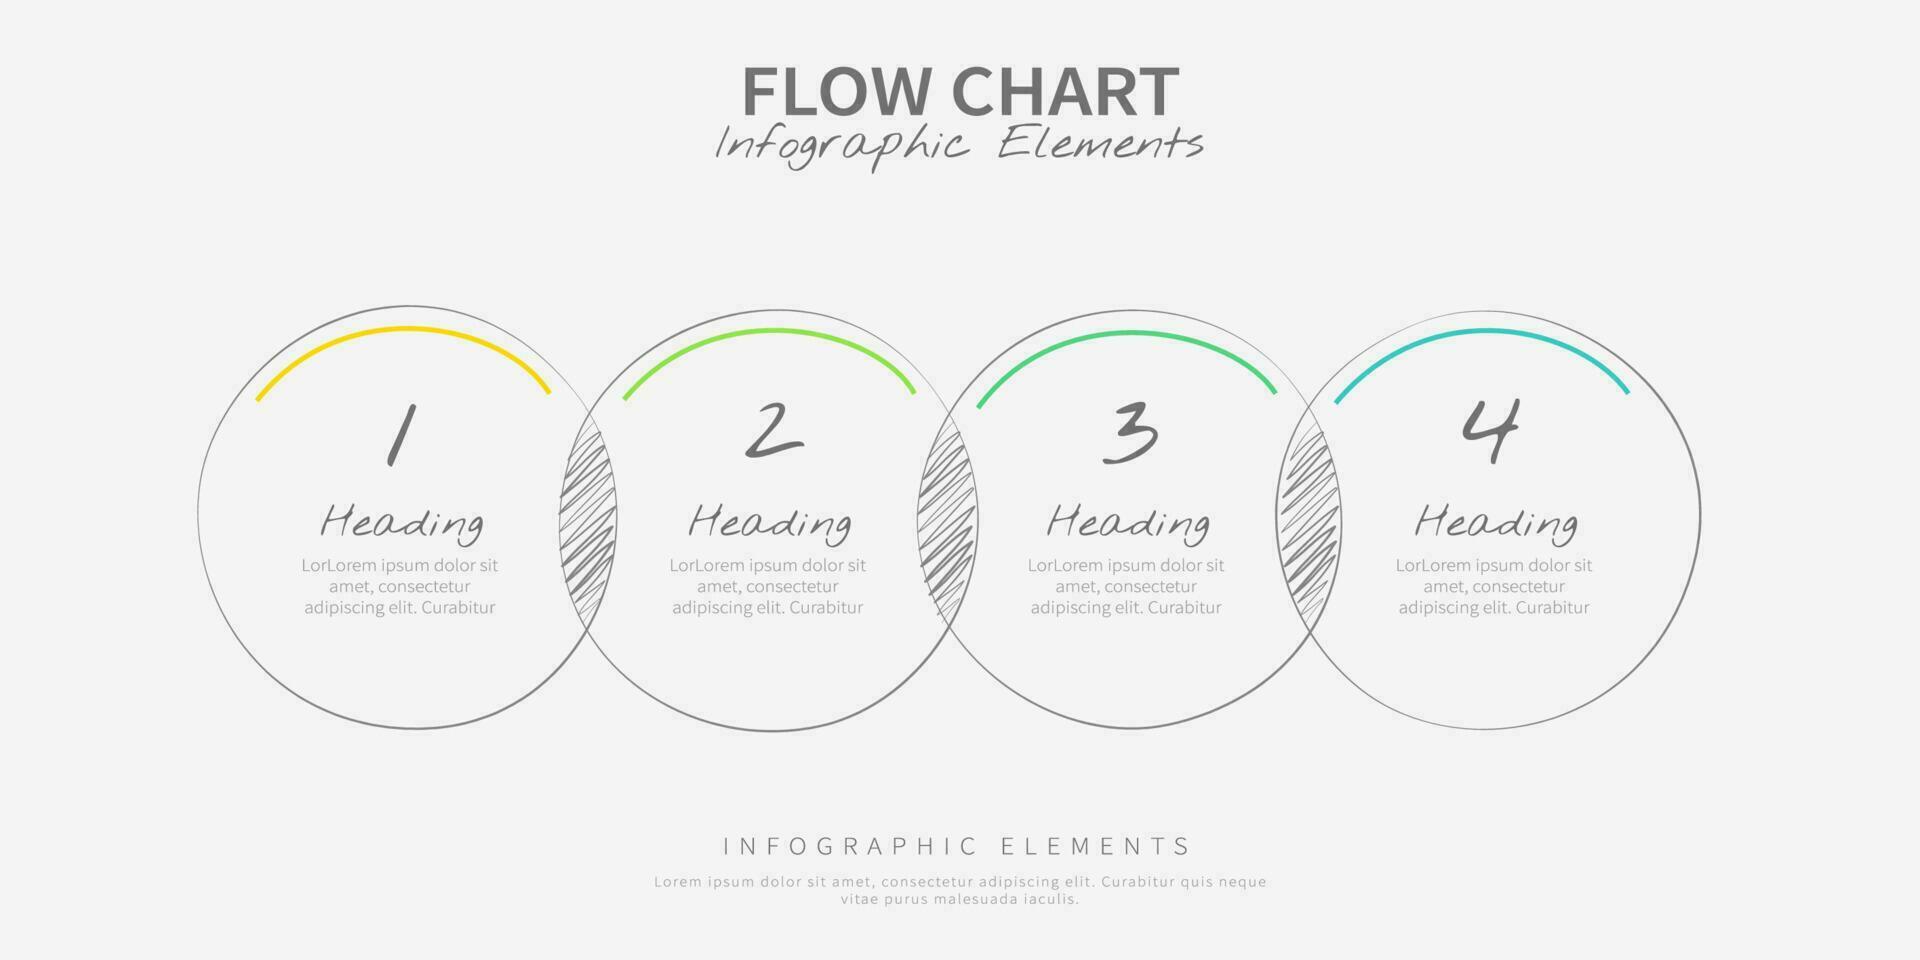 Infographic hand drawn vector elements of flow chart, hand drawn four circles.